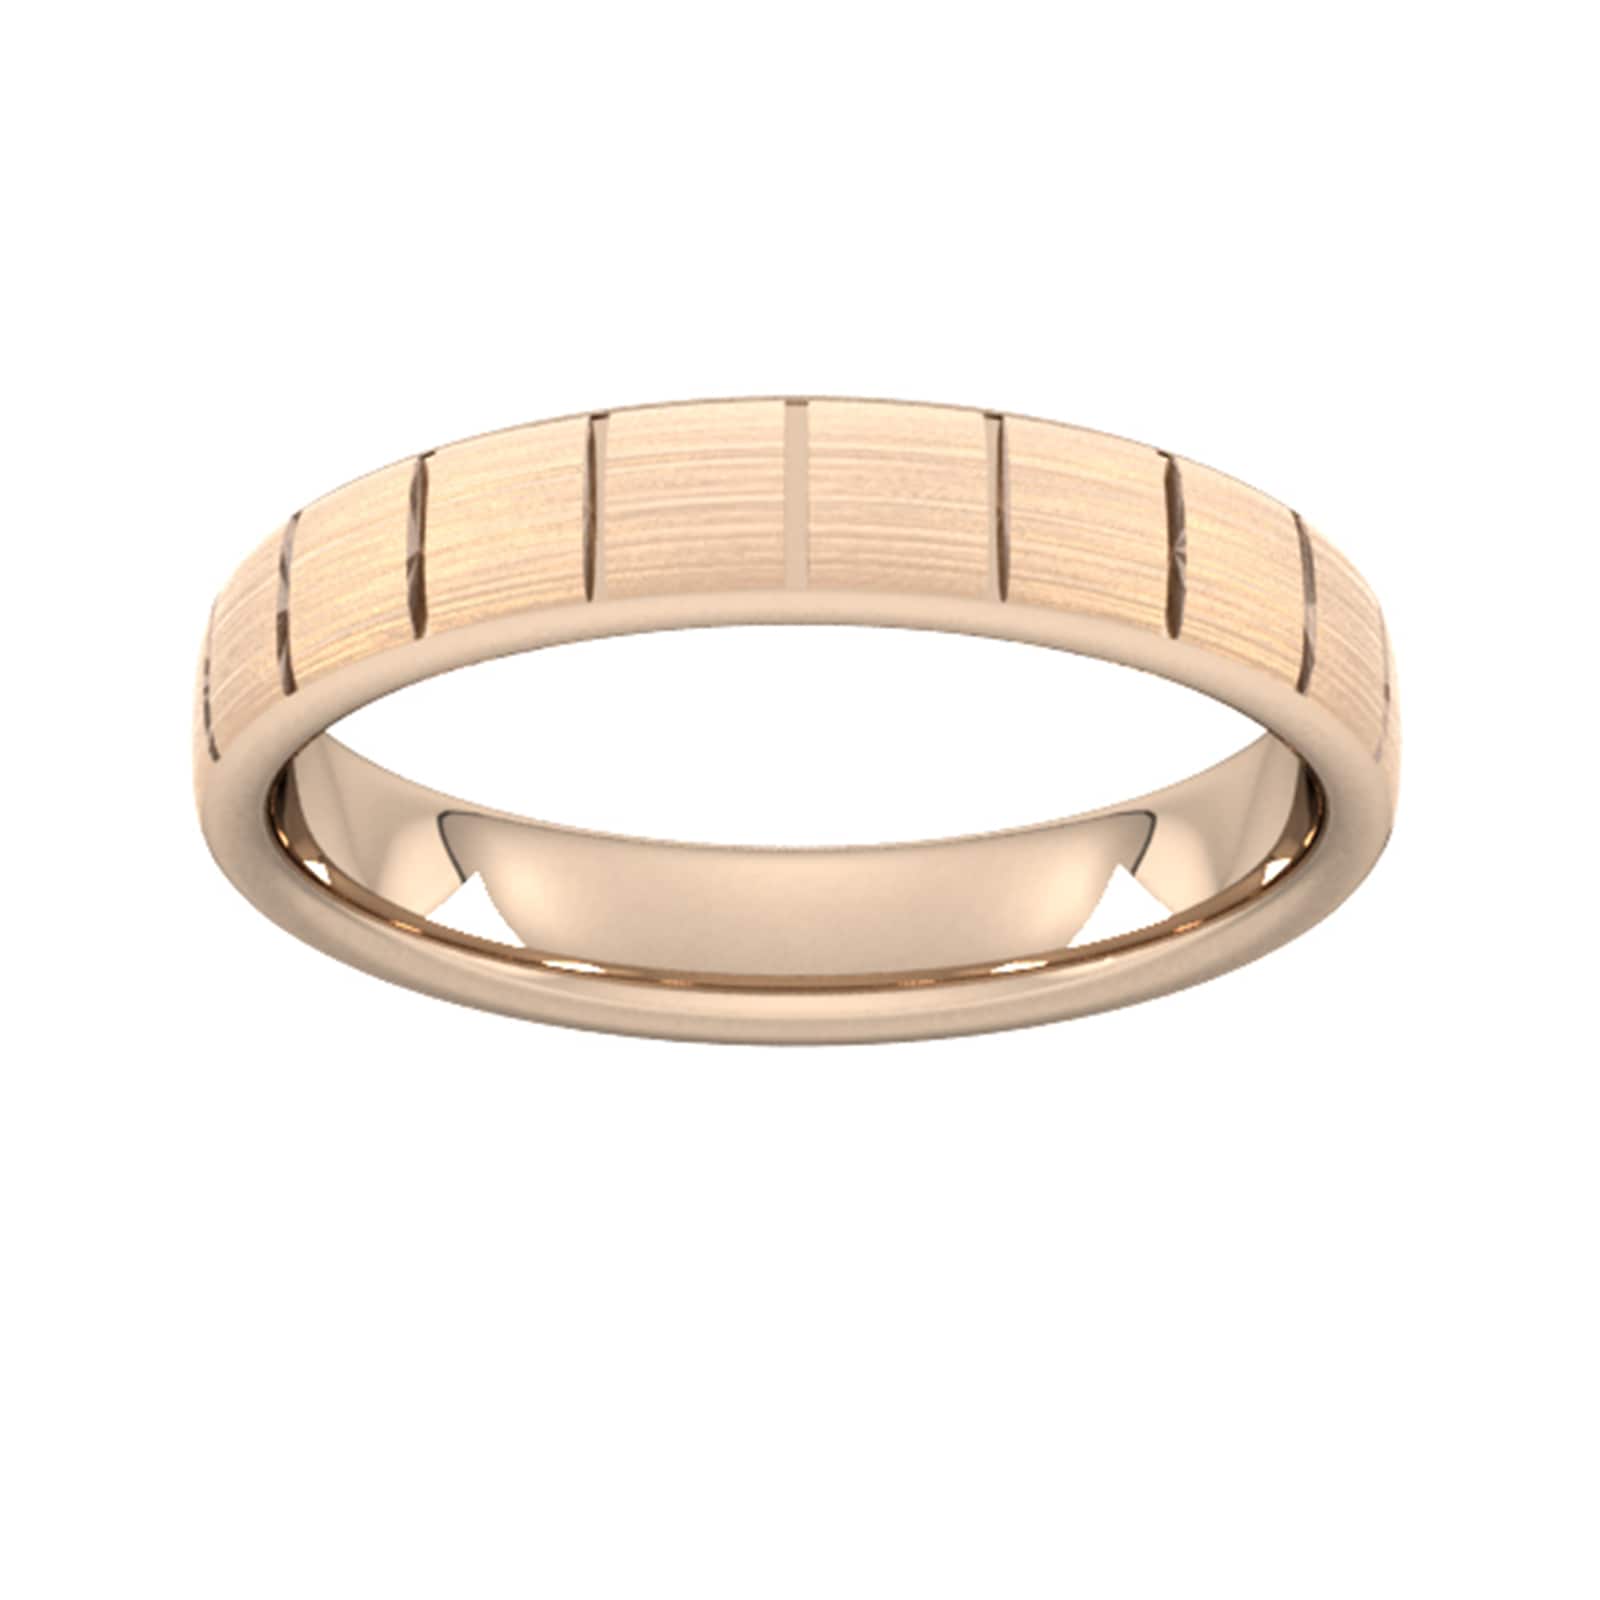 4mm Slight Court Extra Heavy Vertical Lines Wedding Ring In 9 Carat Rose Gold - Ring Size L